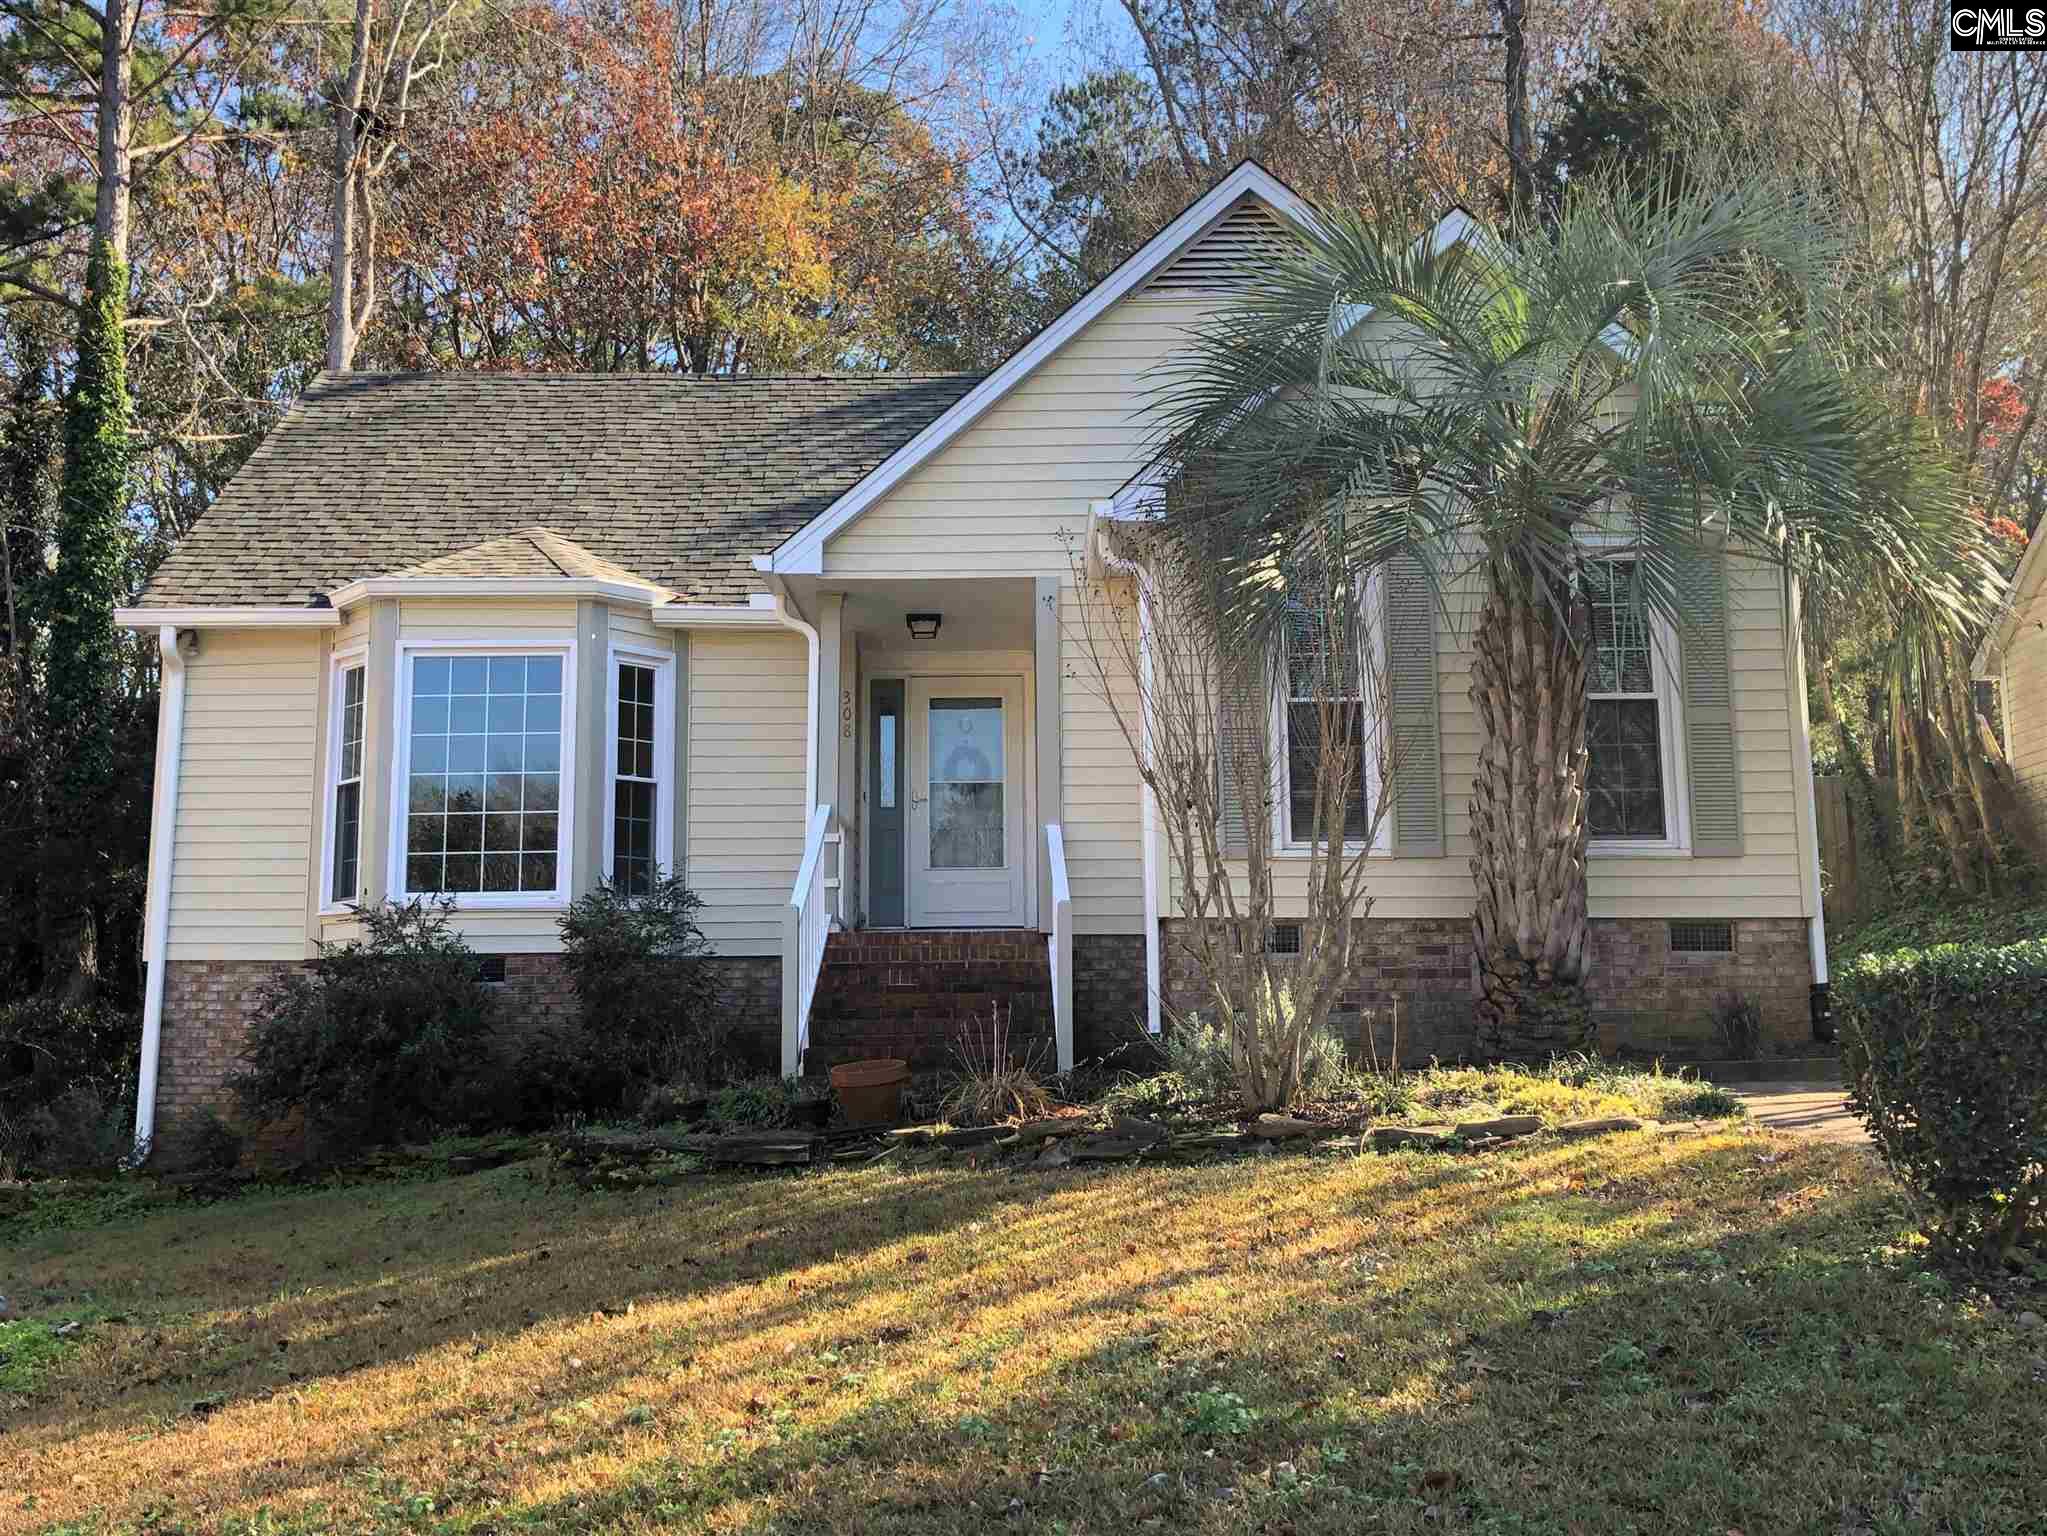 308 Gales River Rd Irmo, SC 29063